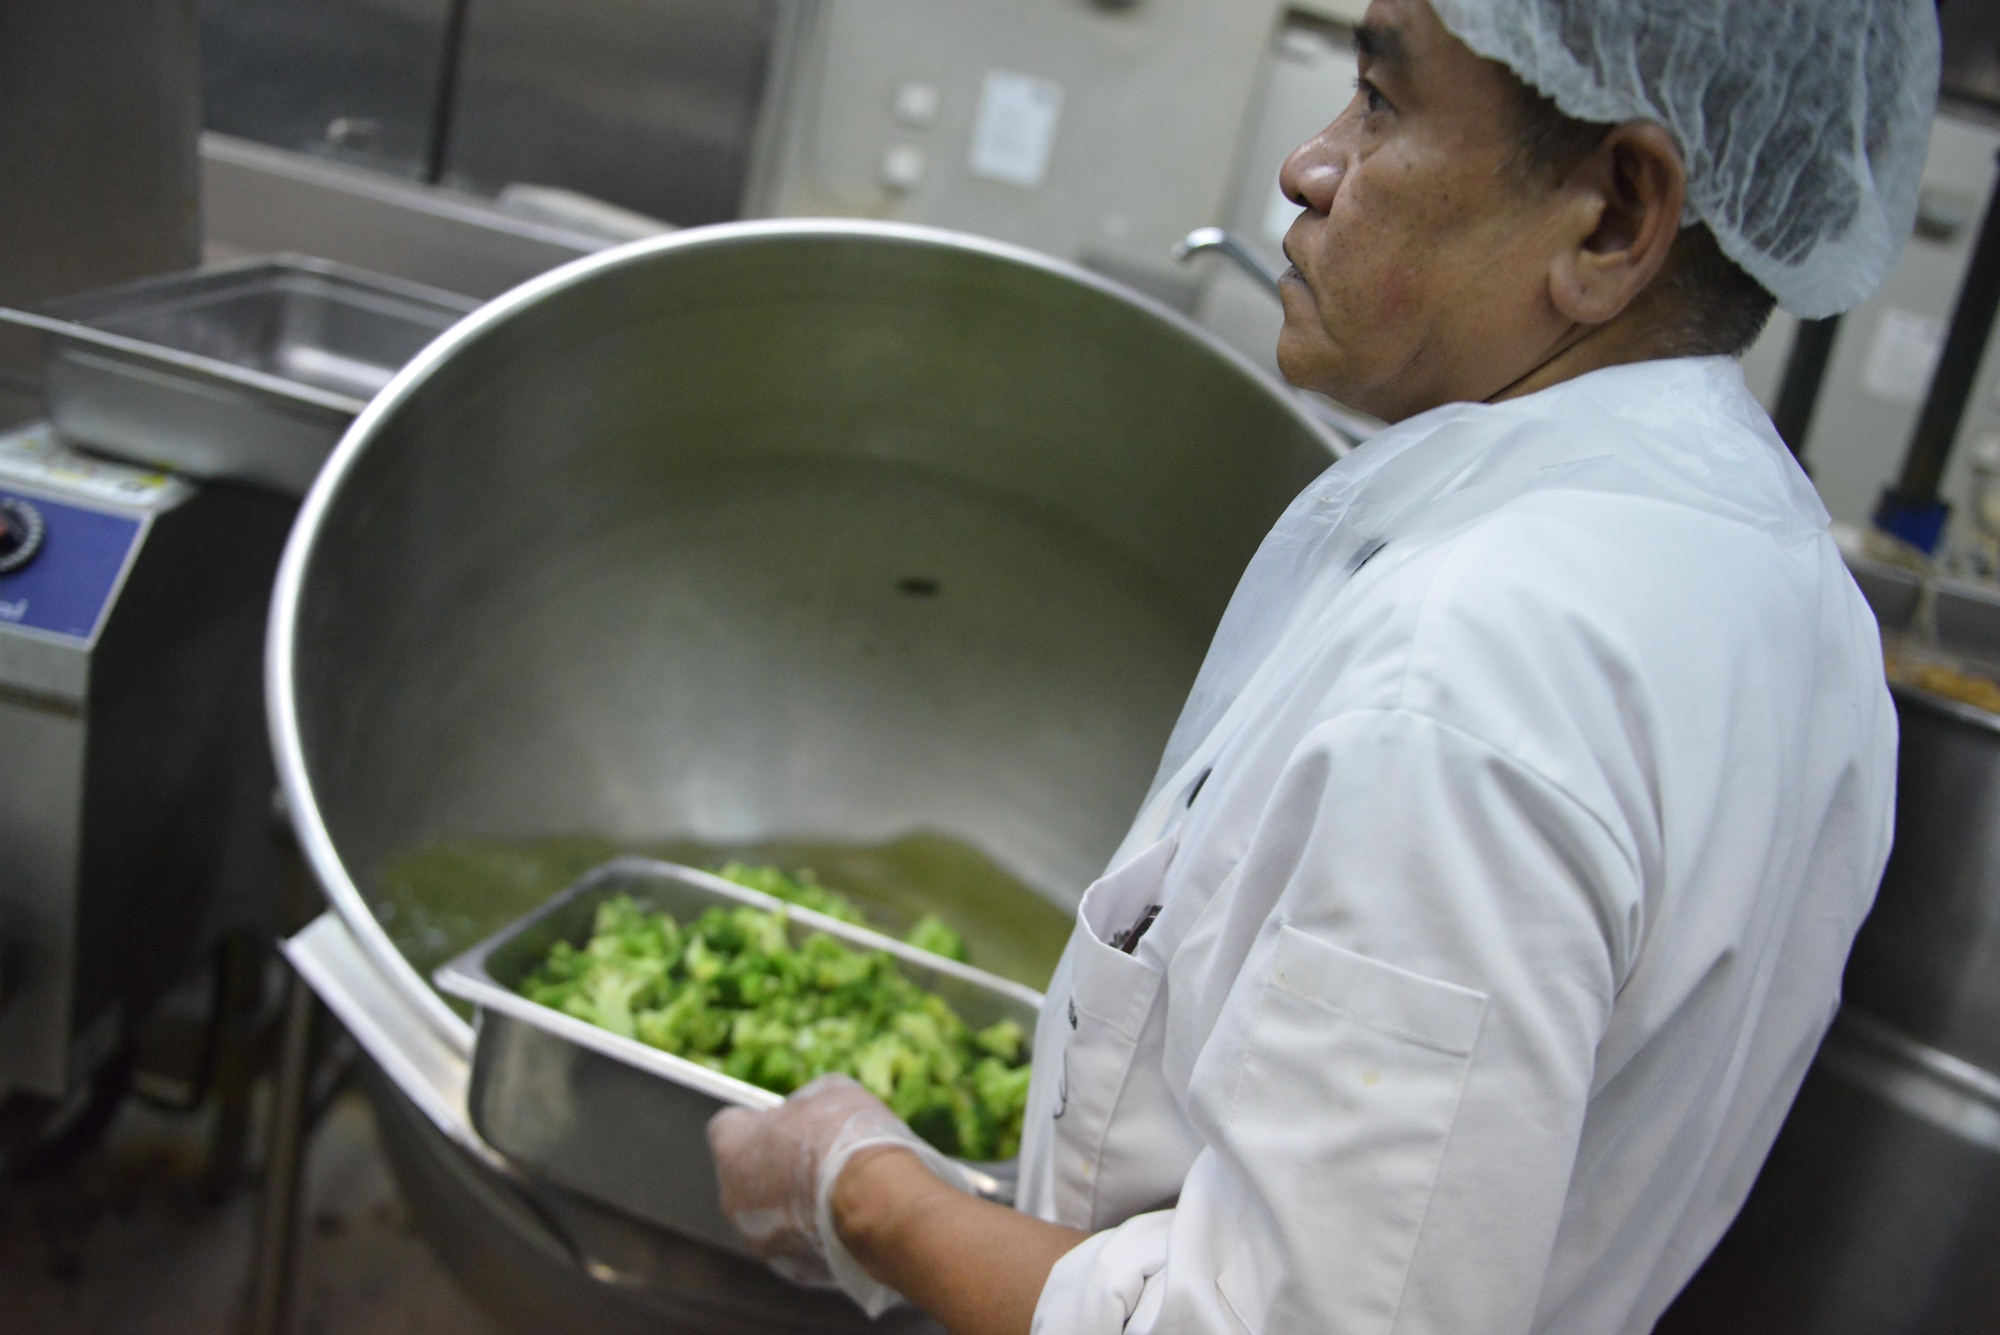 Danilo Escarilla pulls cooked broccoli out of cauldron while helping to prepare part of the day’s lunch menu at the Independence Dining Facility at Al Udeid Air Base, Qatar July 21, 2015. He has been working at Al Udeid since 2006. (U.S. Air Force photo/Staff Sgt. Alexandre Montes)